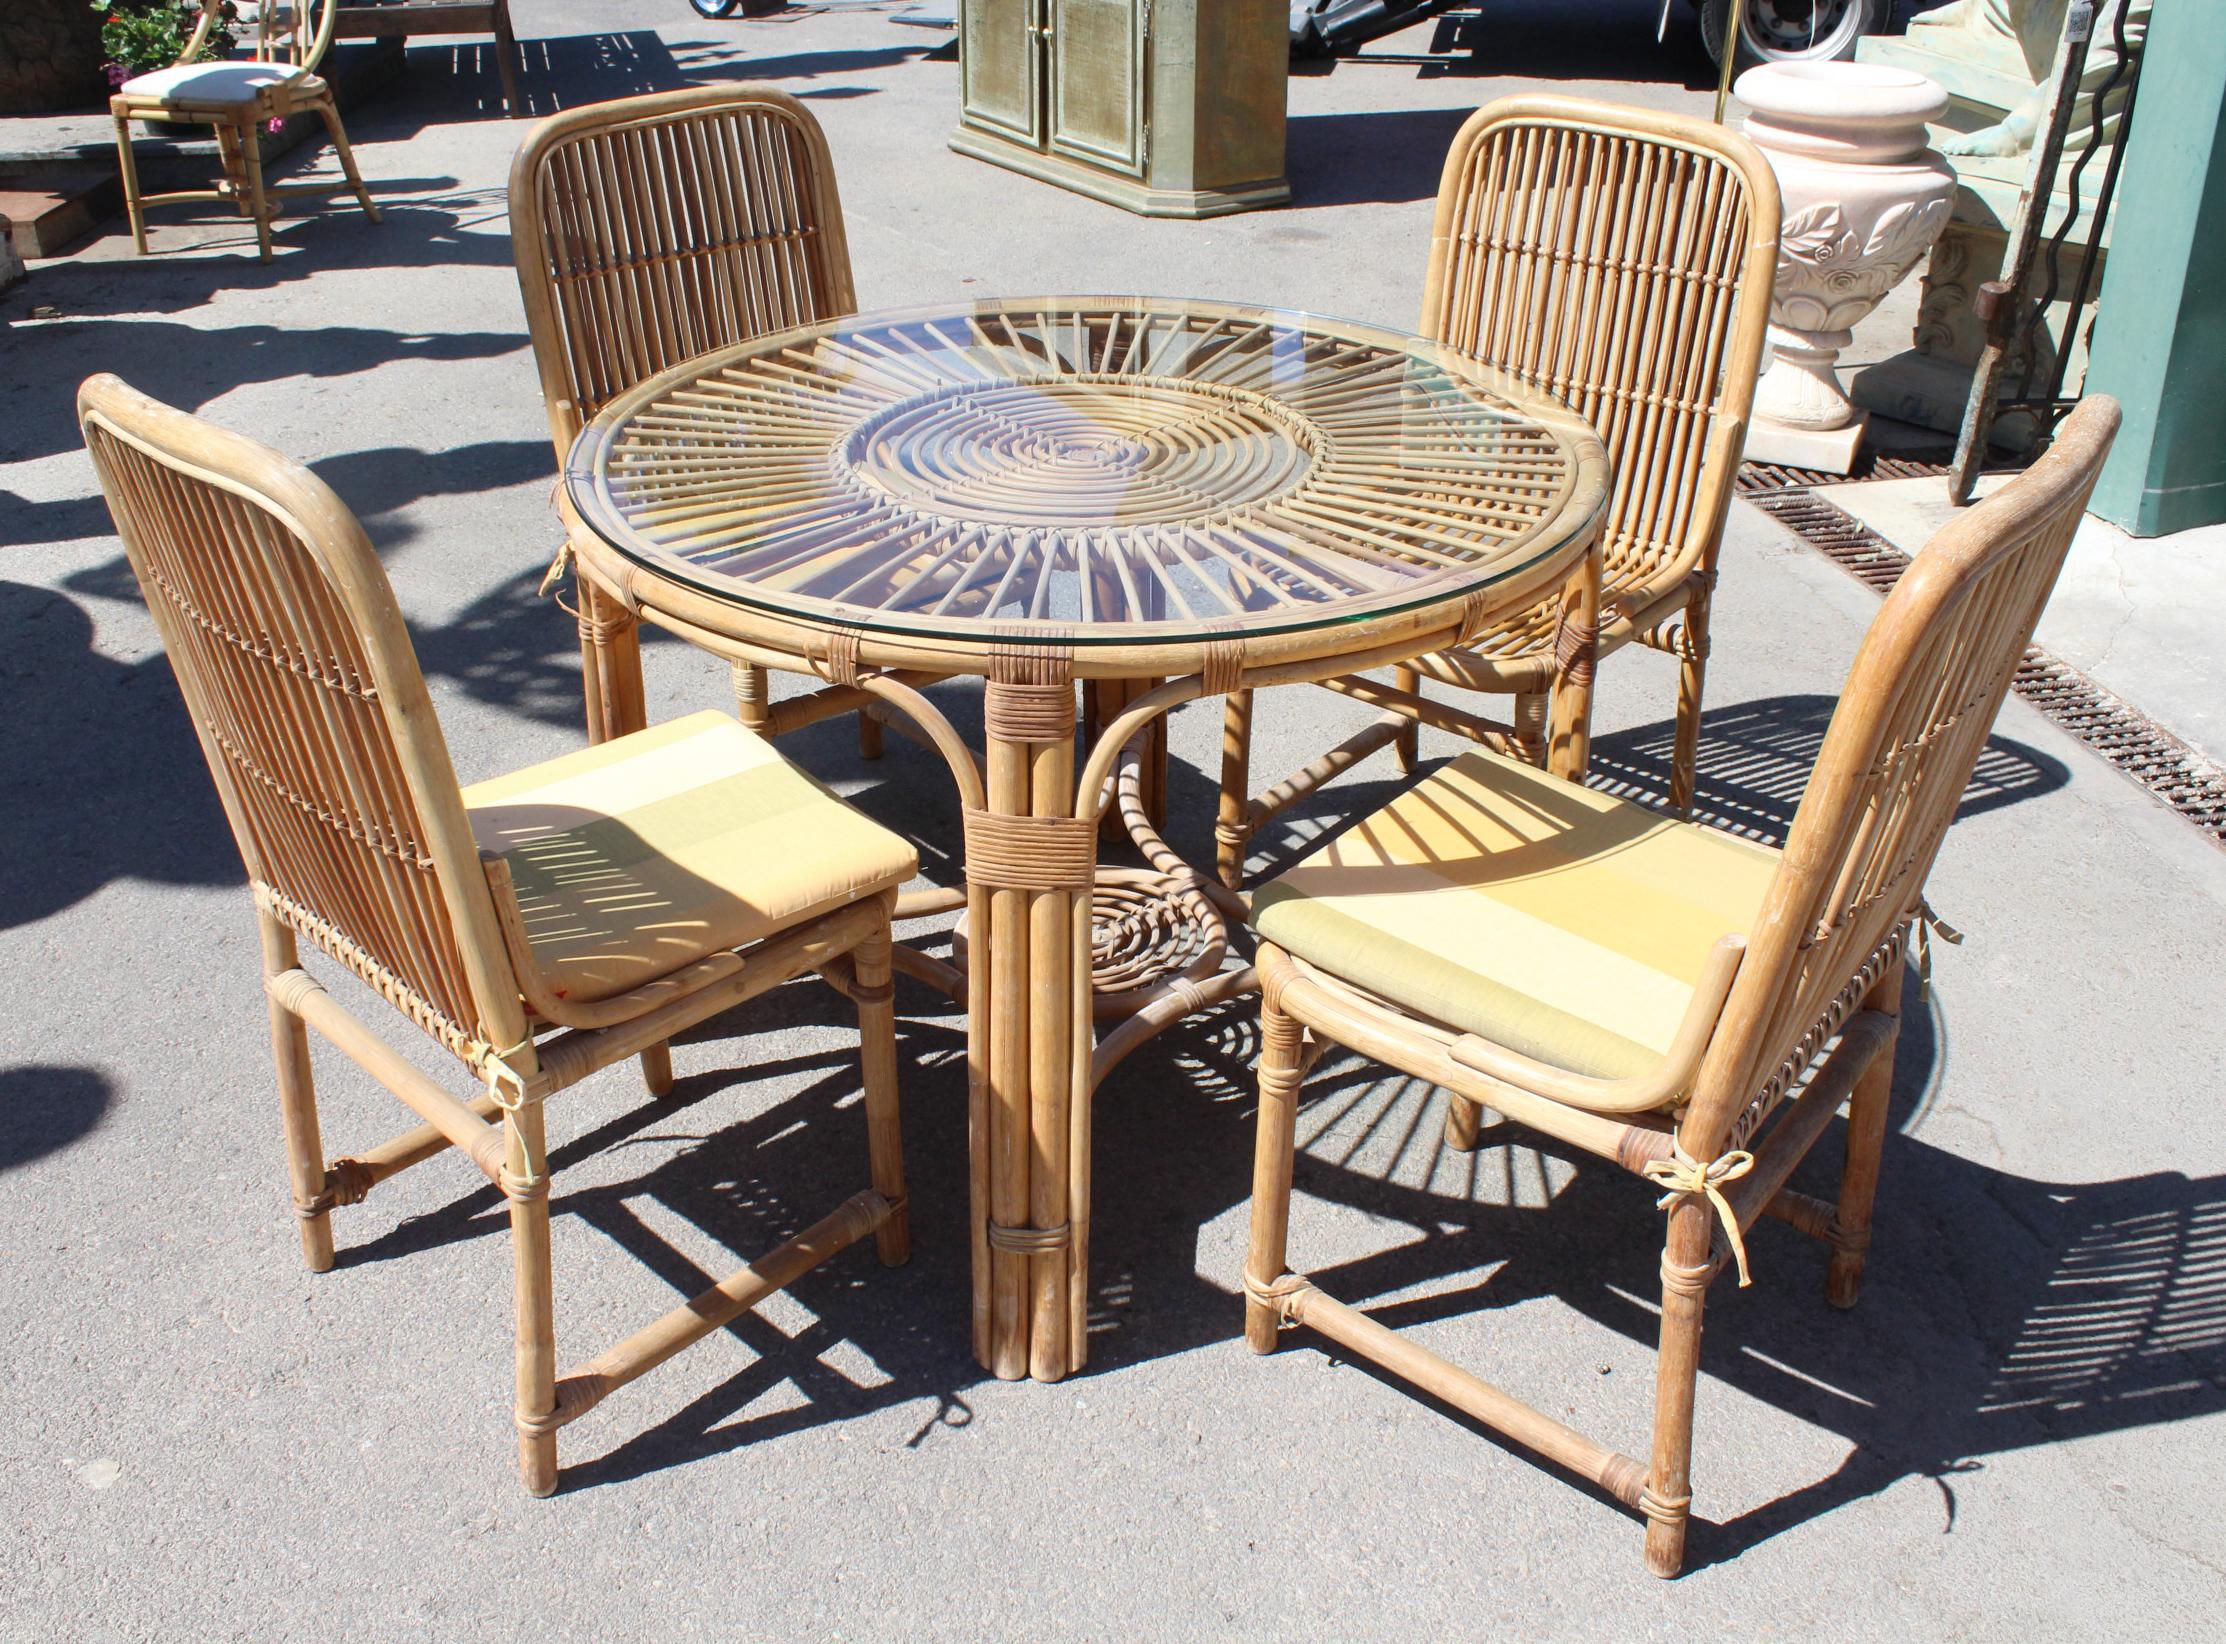 1970s Spanish bamboo 4-piece dining set.

Table size: 74 x 100 x 100
Chair size: 94 x 46 x 50.